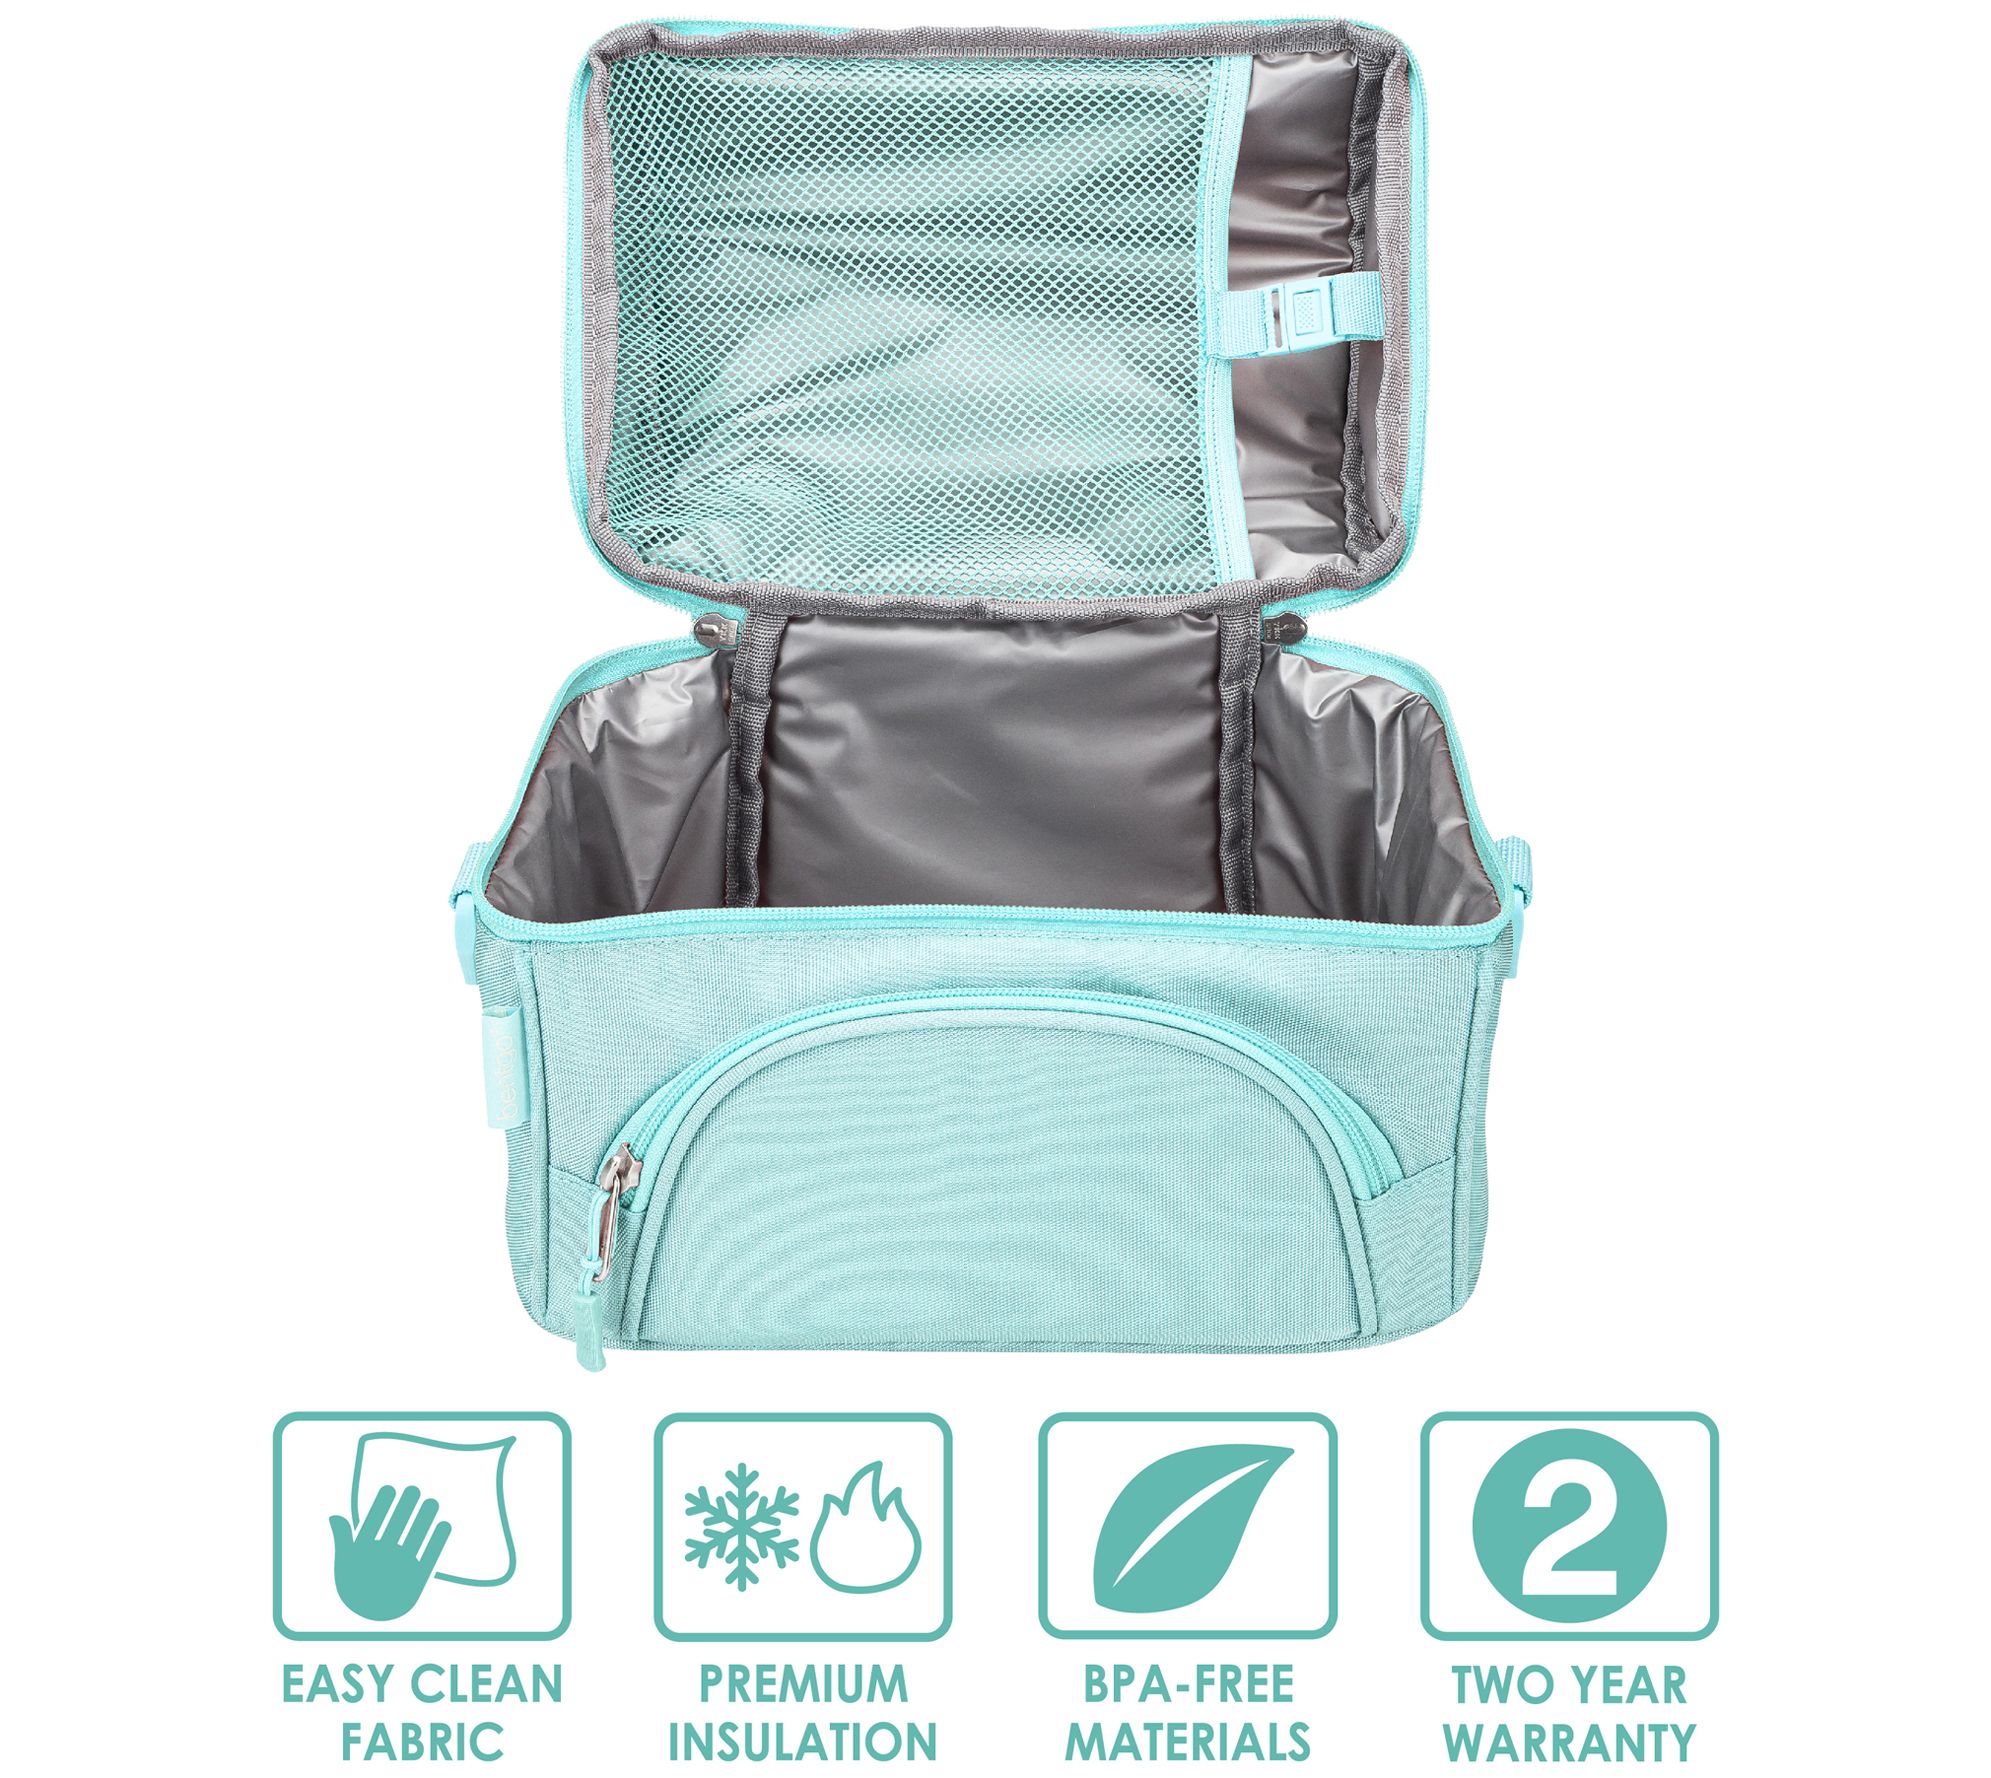 Bentgo Deluxe Lunch Bag, Durable & Insulated Bag, Internal Mesh